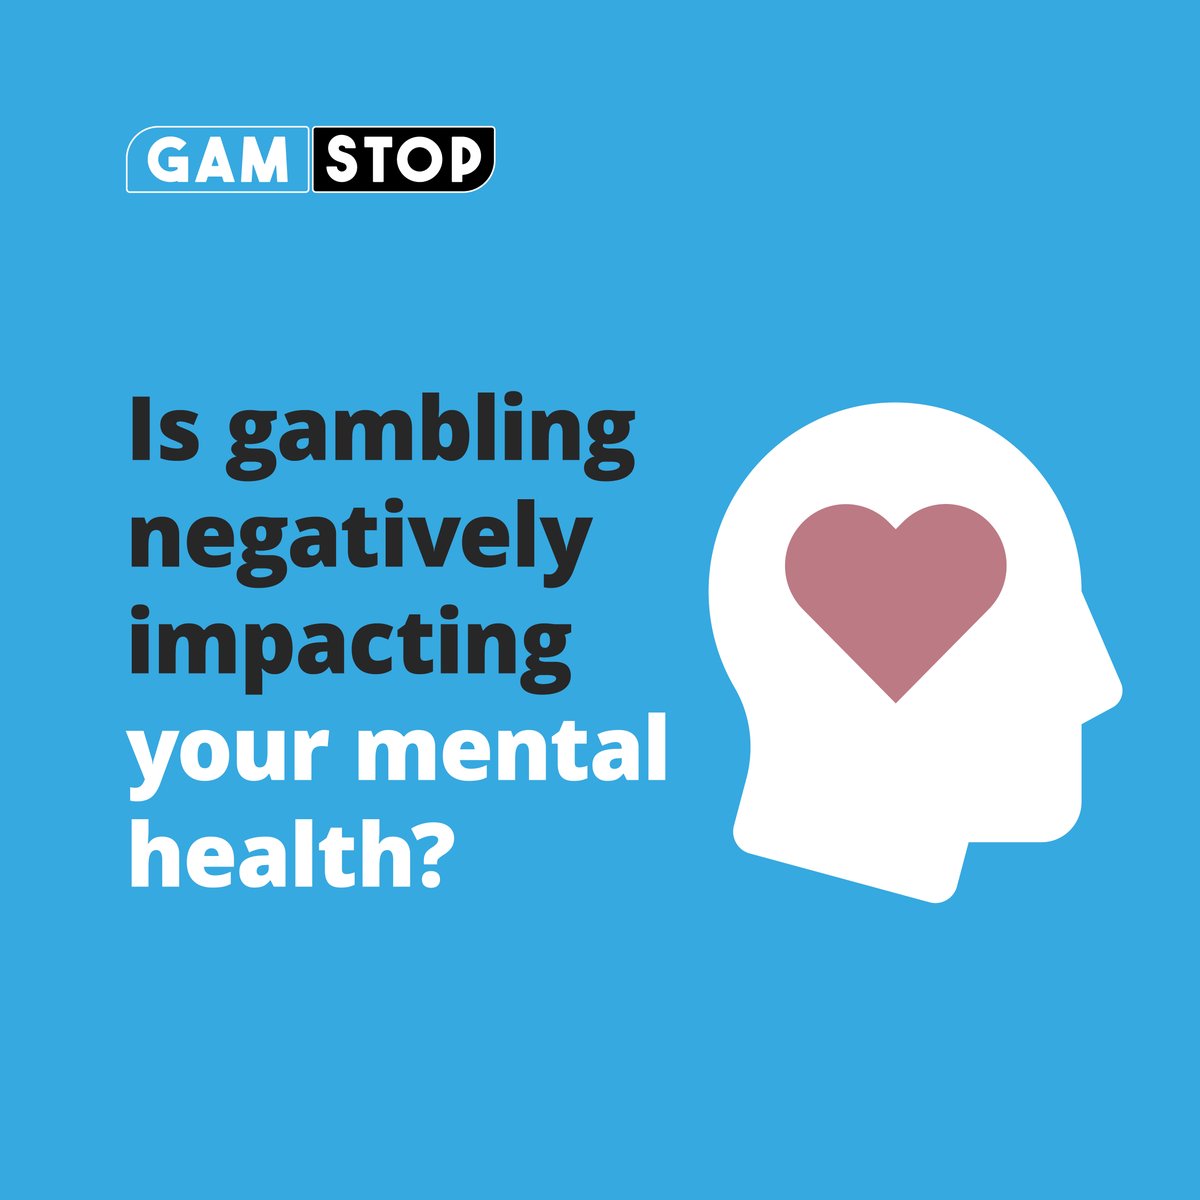 Struggling with gambling can have a really negative impact on your mental health. 

Call the National Gambling Helpline on  0808 8020 133 for free, confidential advice and support.

Register with GAMSTOP at .

